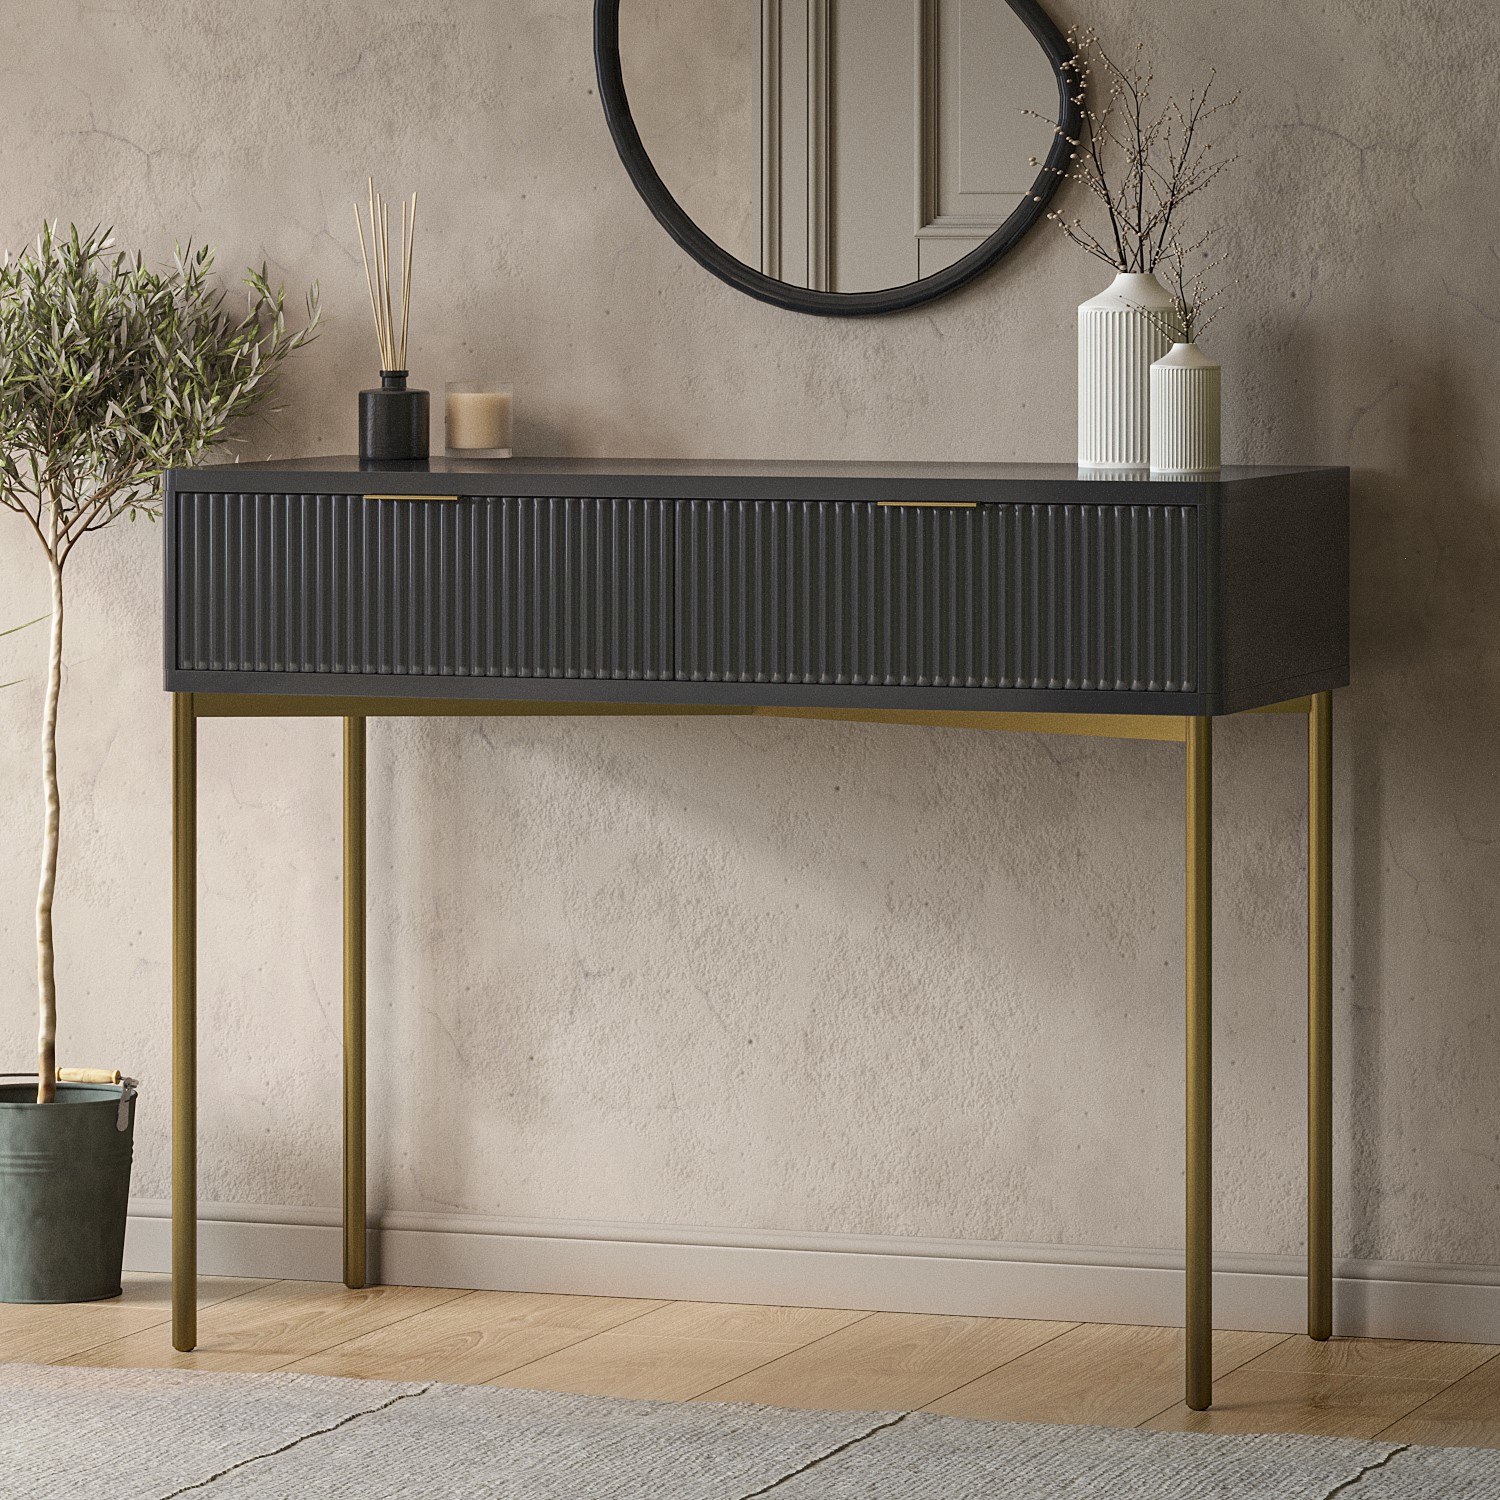 Read more about Dark grey high gloss dressing table with 2 drawers valencia